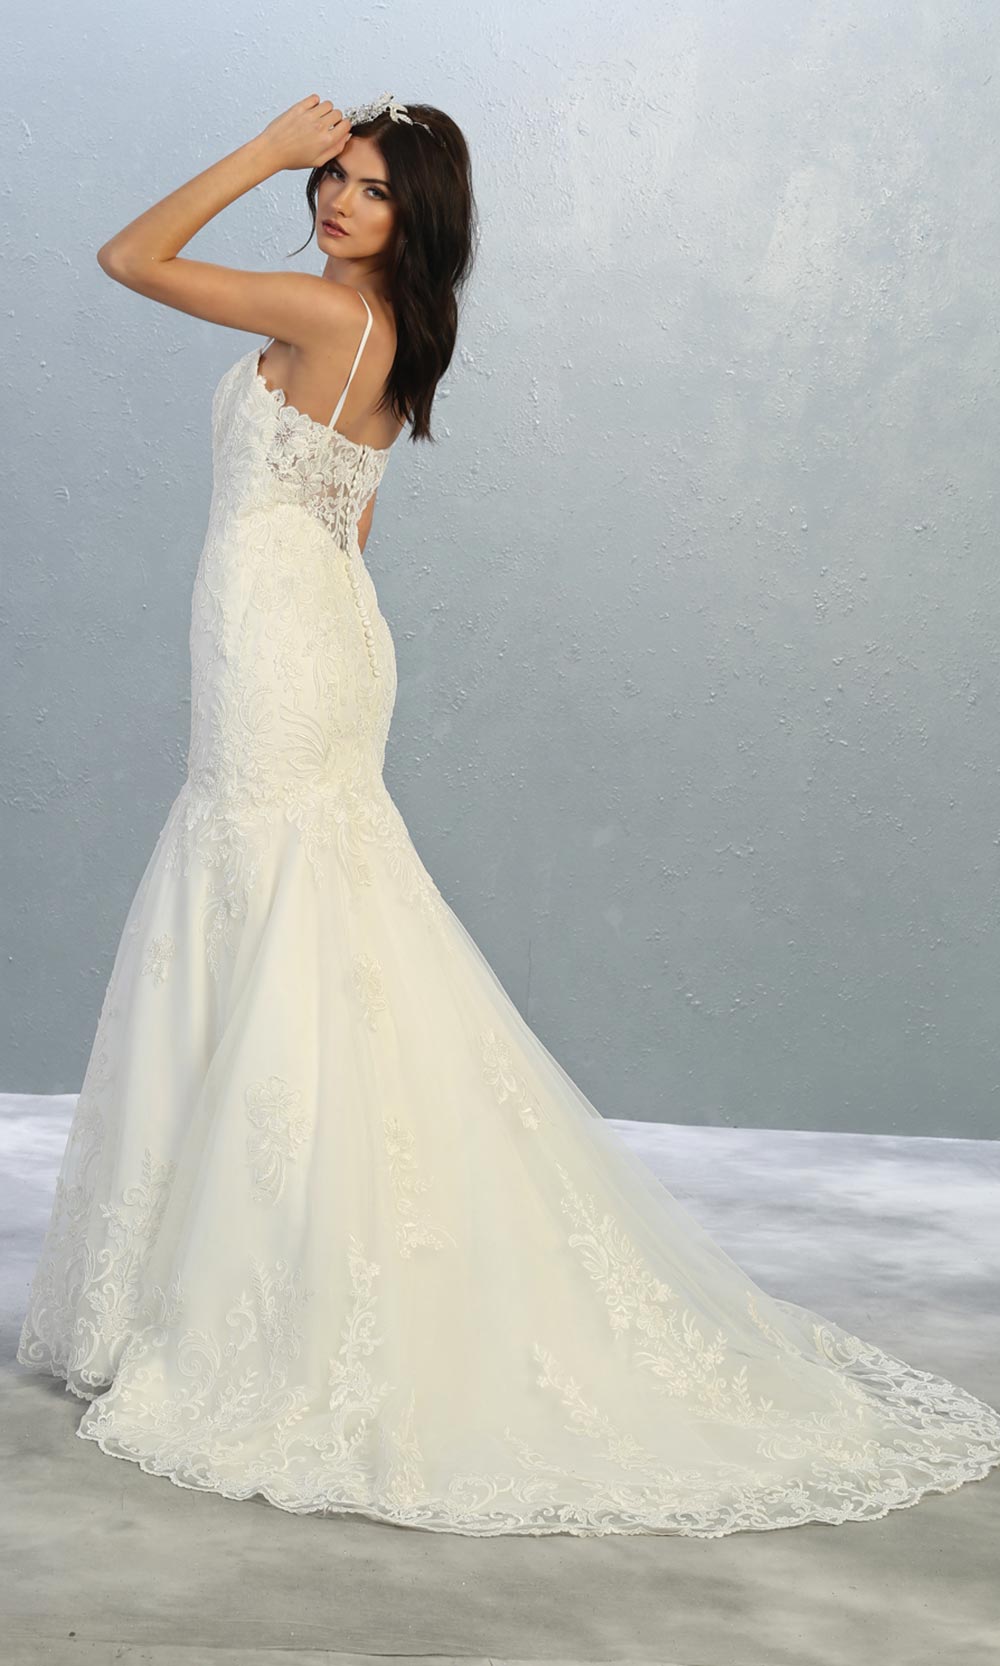 Mayqueen RQ7857 long ivory fitted lace wedding mermaid dress w/ train. Sexy bridal gown is perfect wedding bridal dress, sequin  prom dress, court/civil wedding, second wedding, destination wedding dress, cheap wedding dress. Plus sizes avail-b.jpg